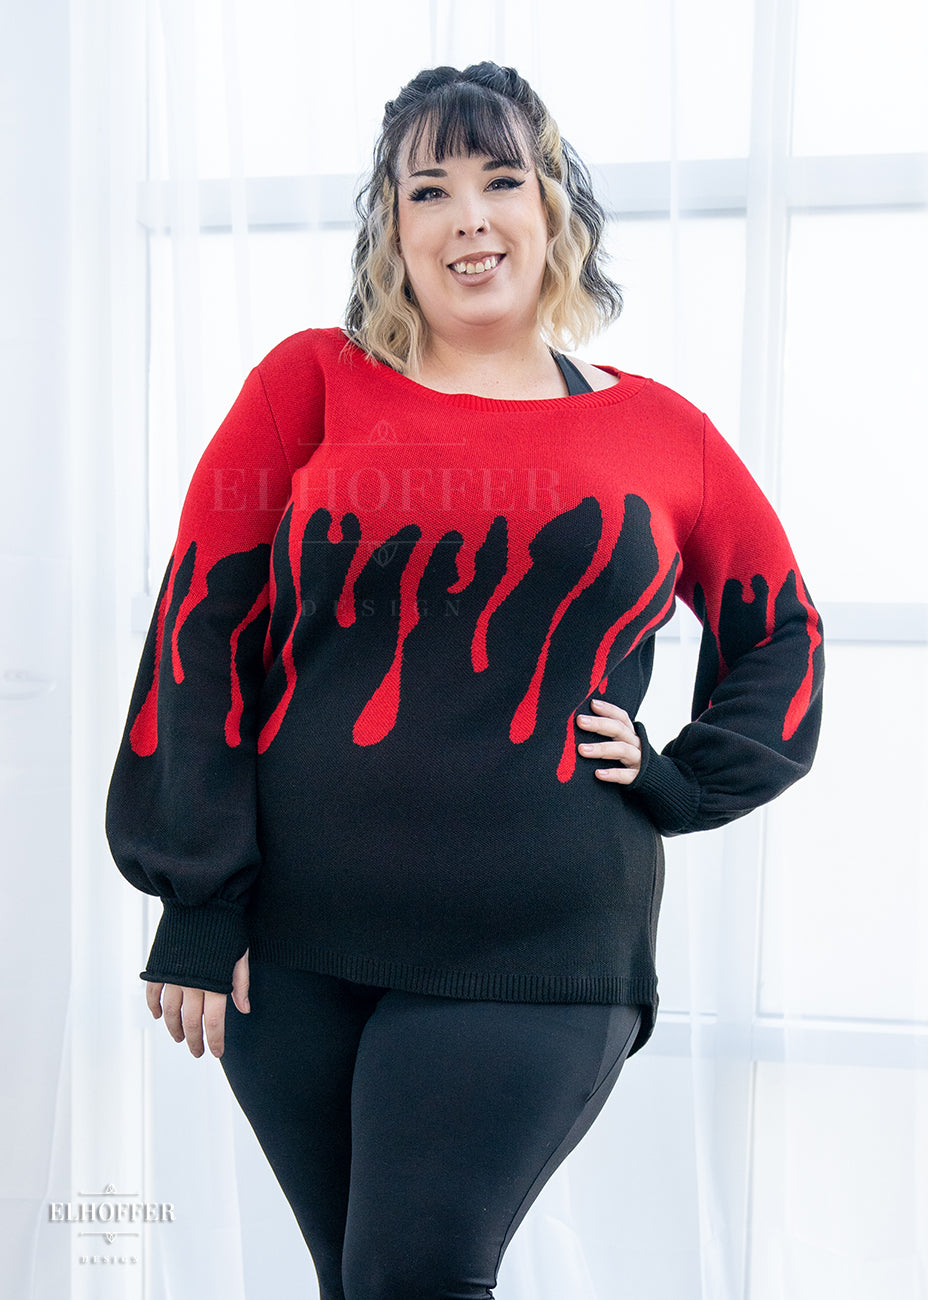 Katie Lynn, a fair skinned 2xl model with short curly black and white hair with bangs, is smiling while wearing an oversize sweater with a bright red blood drip design that looks like it's oozing down onto a black sweater that has long billowing sleeves with thumbholes.